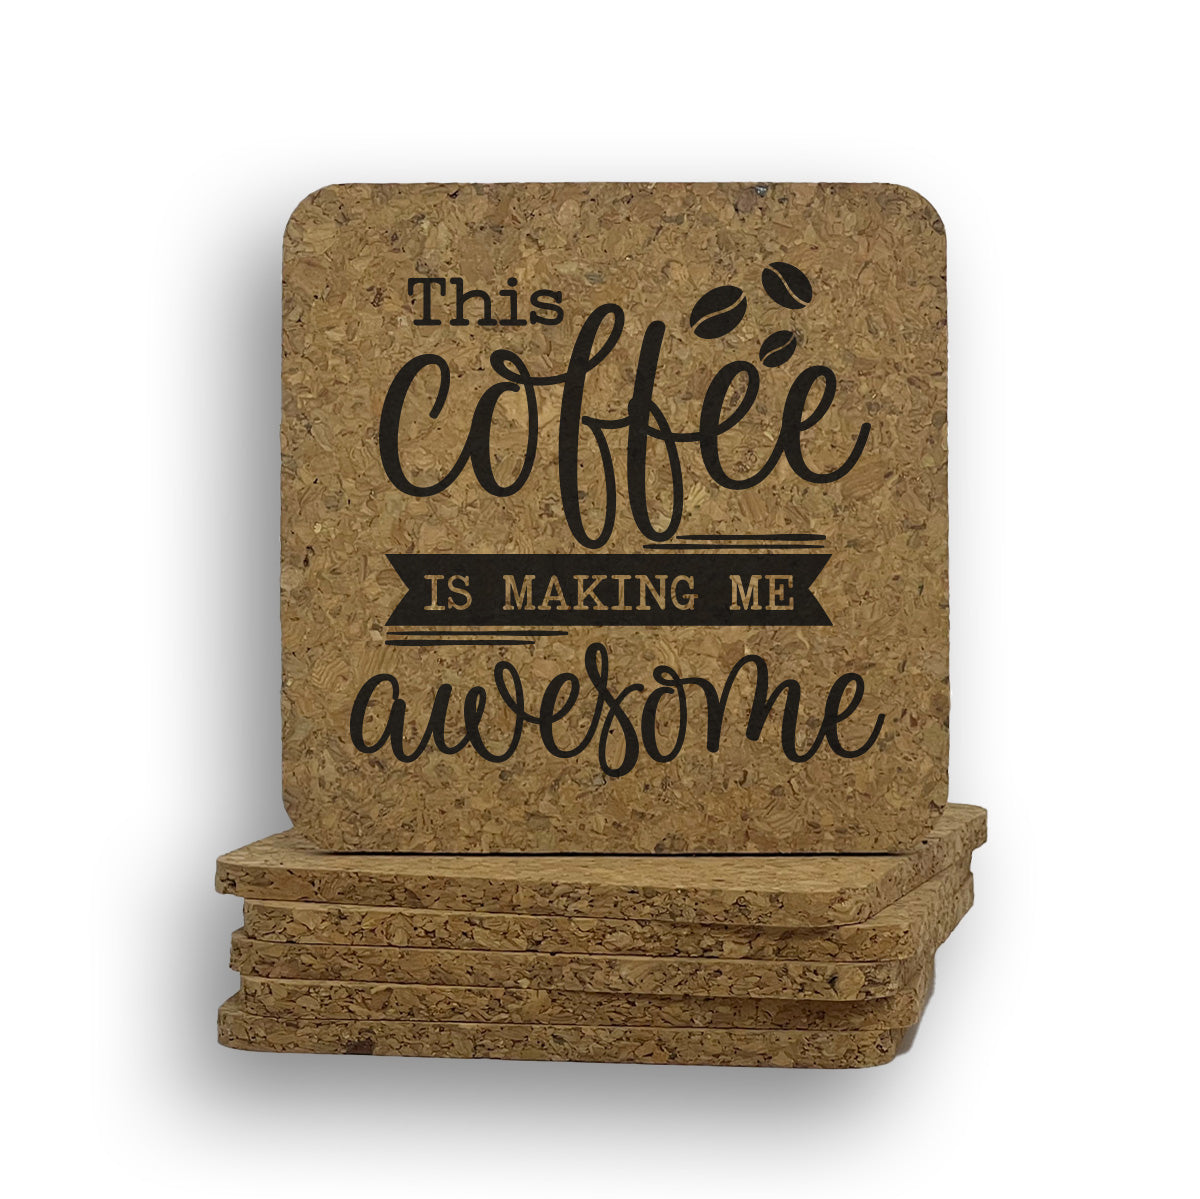 This Coffee Is Making Me Awesome Coaster